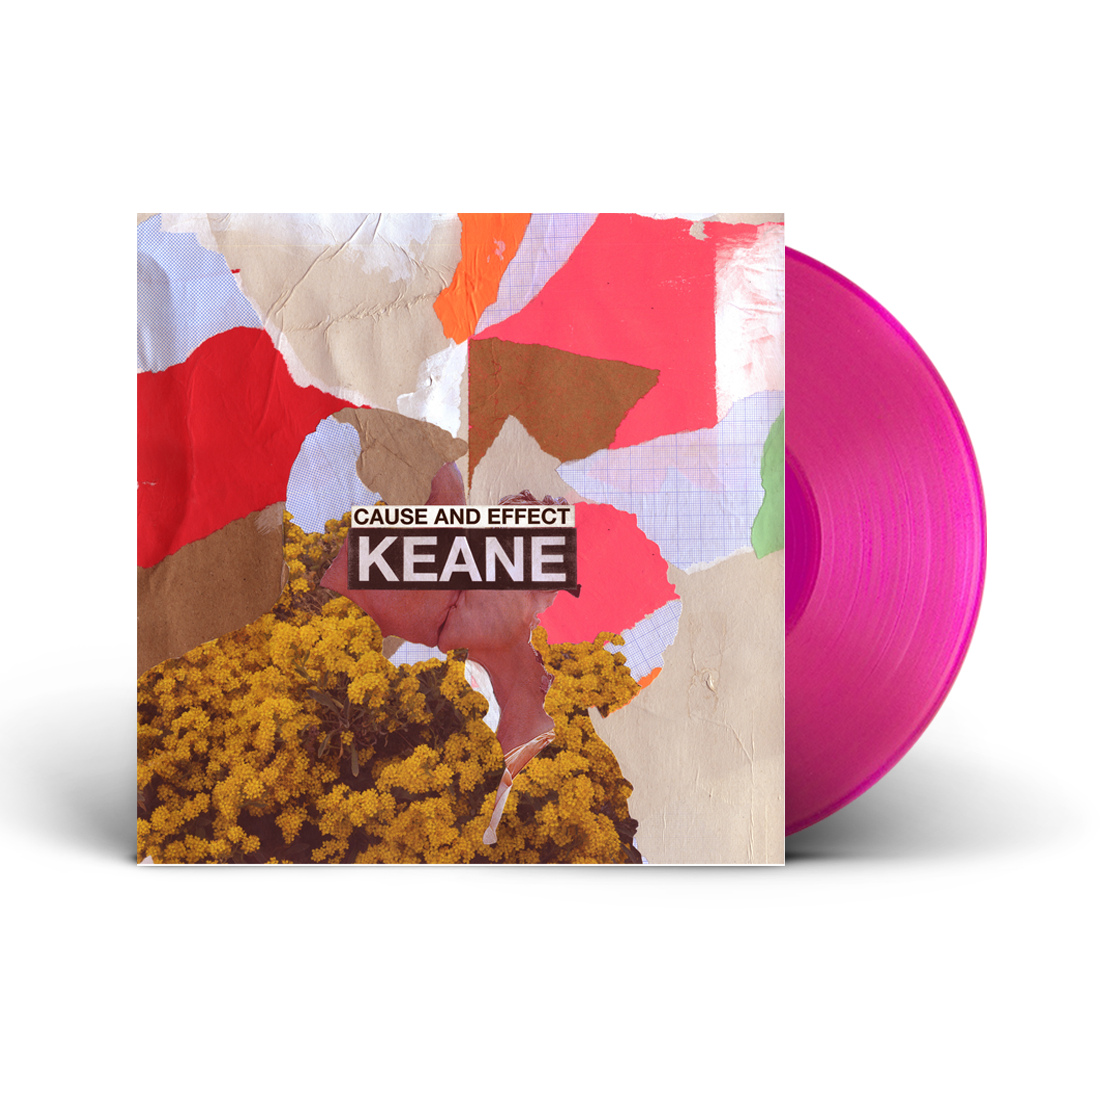 Keane - Cause and Effect: Limited Edition Pink Vinyl LP